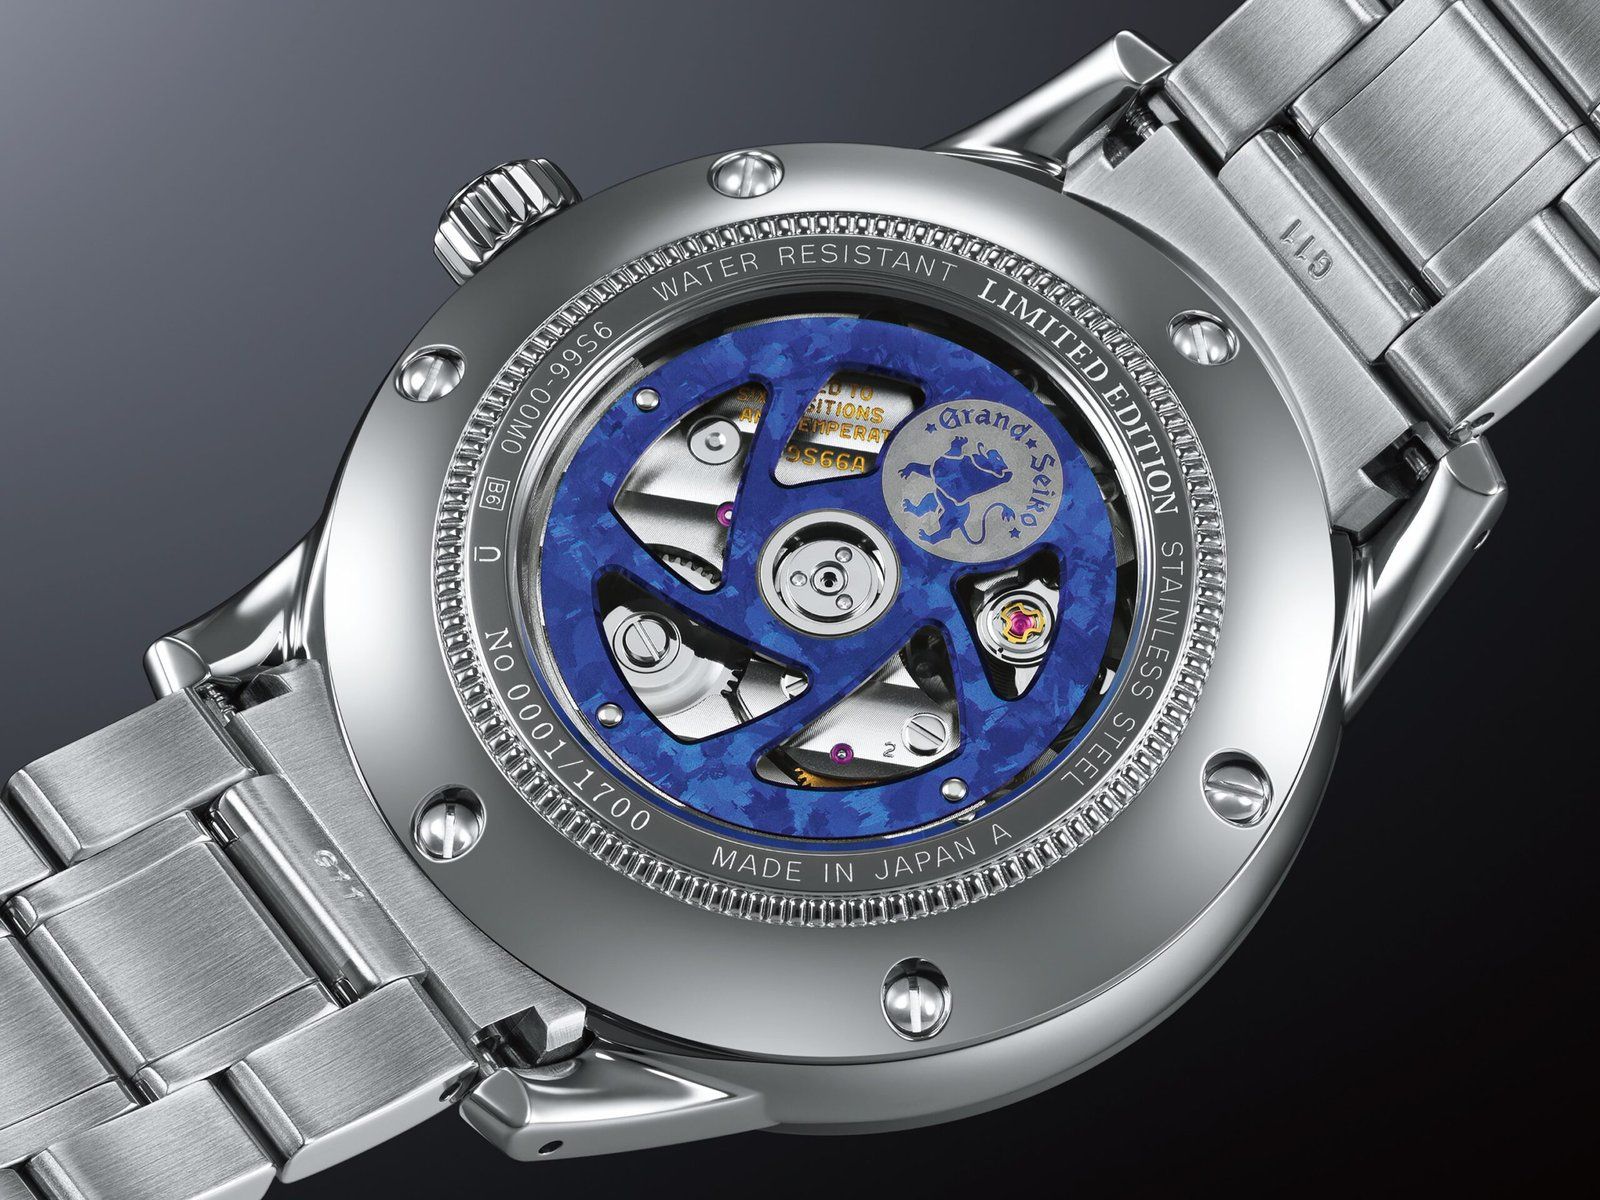 The clear sapphire crystal case back provides an invitation to view a titanium oscillating weight.